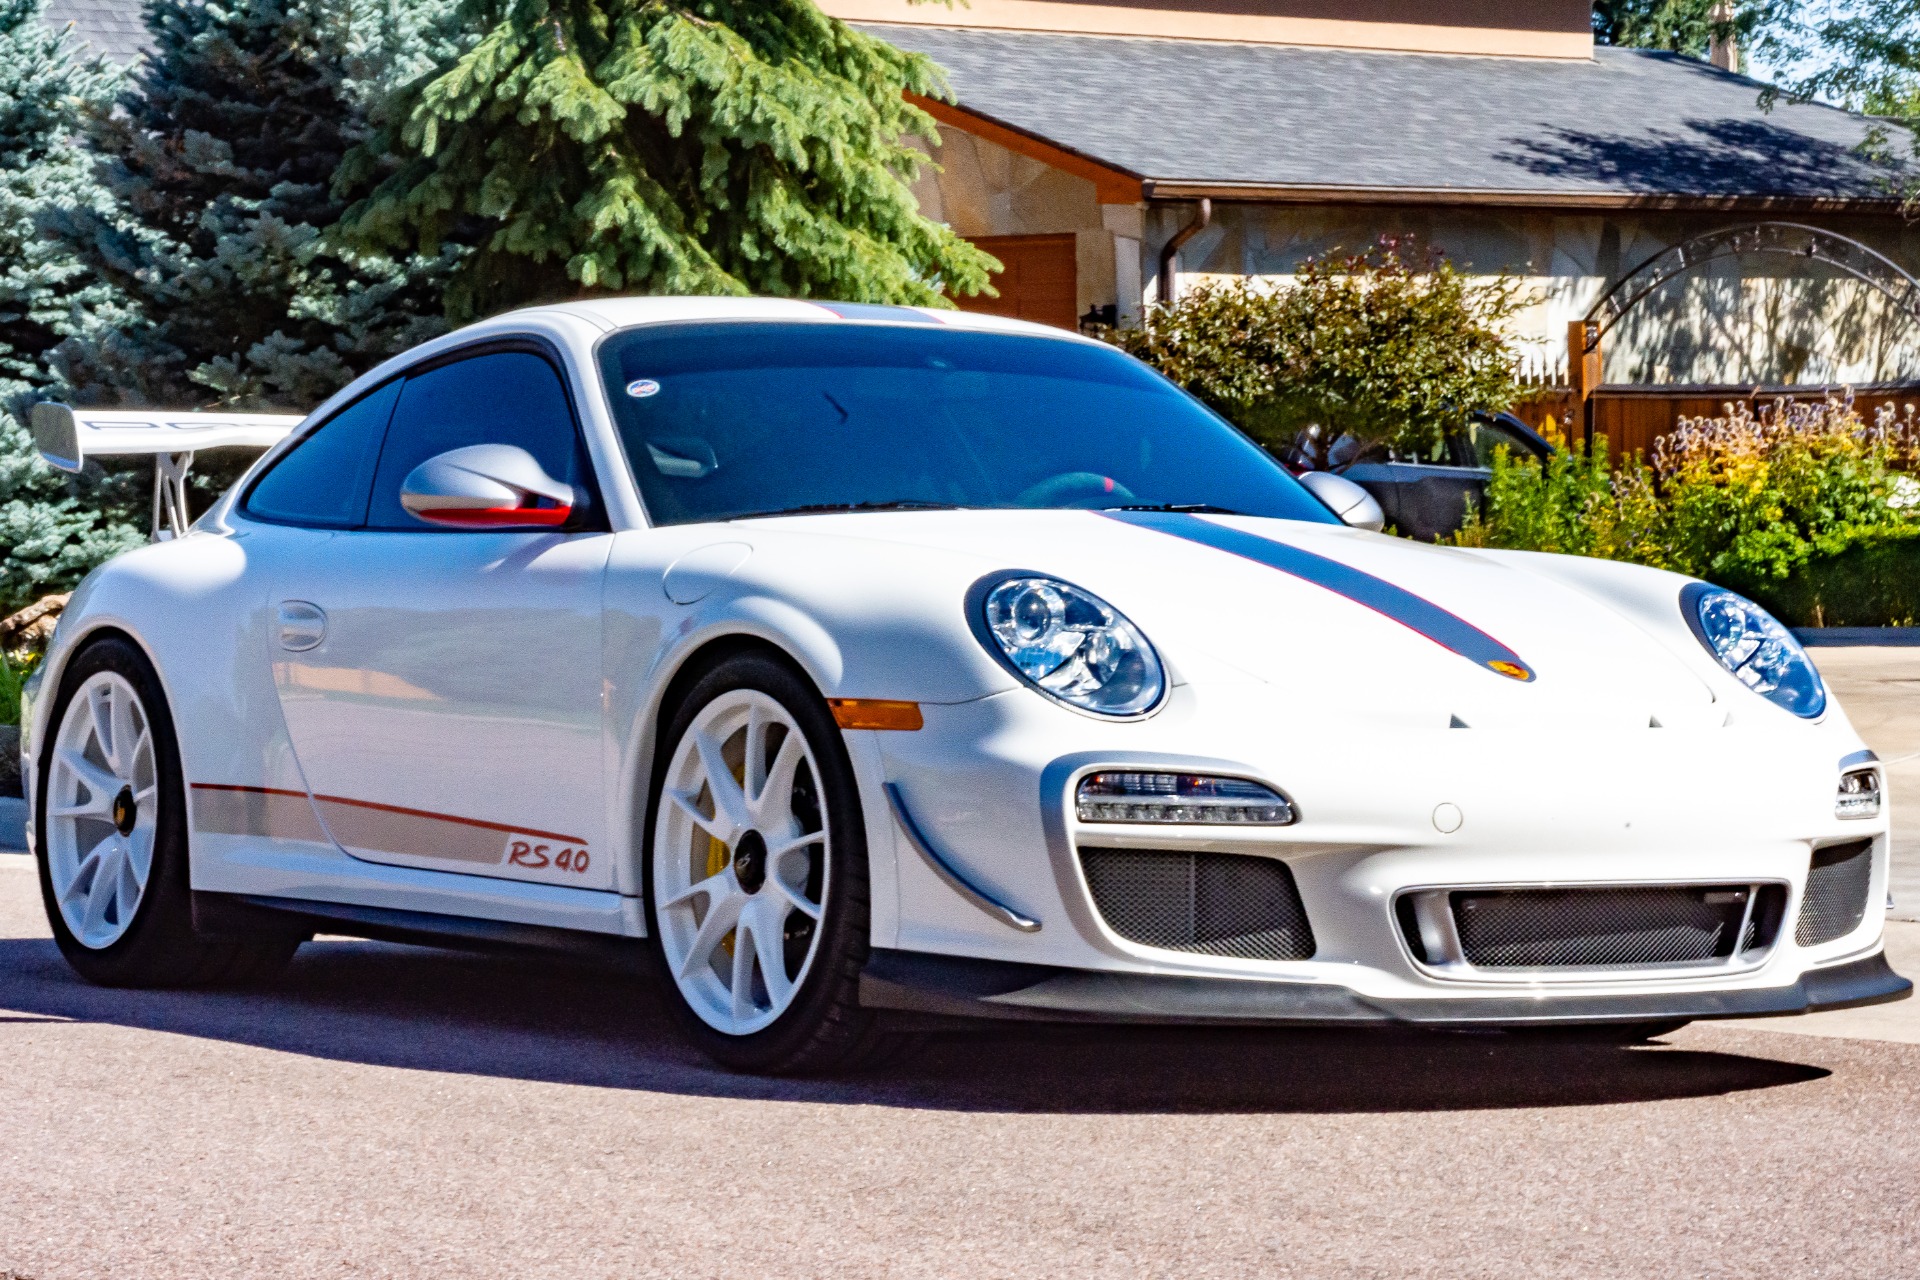 Used 2011 Porsche 911 GT3 RS 4.0 For Sale ($835,000)